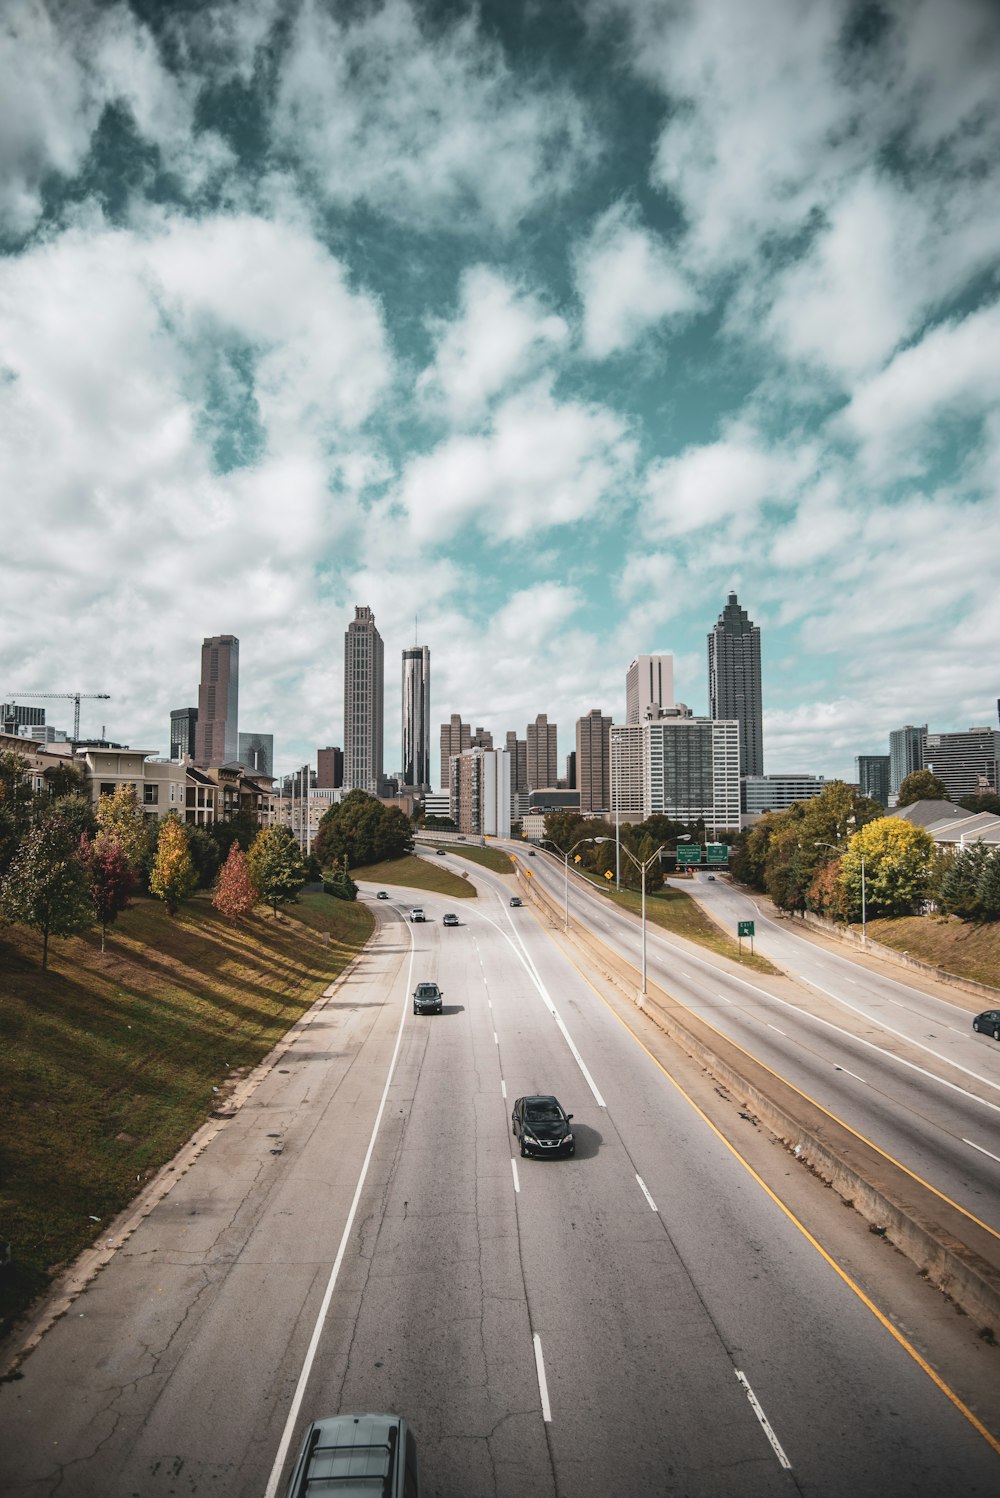 100 Beautiful Atlanta Pictures Download Free Images On Unsplash These free photos are cc0 licensed, so you can use them in both your personal or commercial projects without attribution. 100 beautiful atlanta pictures